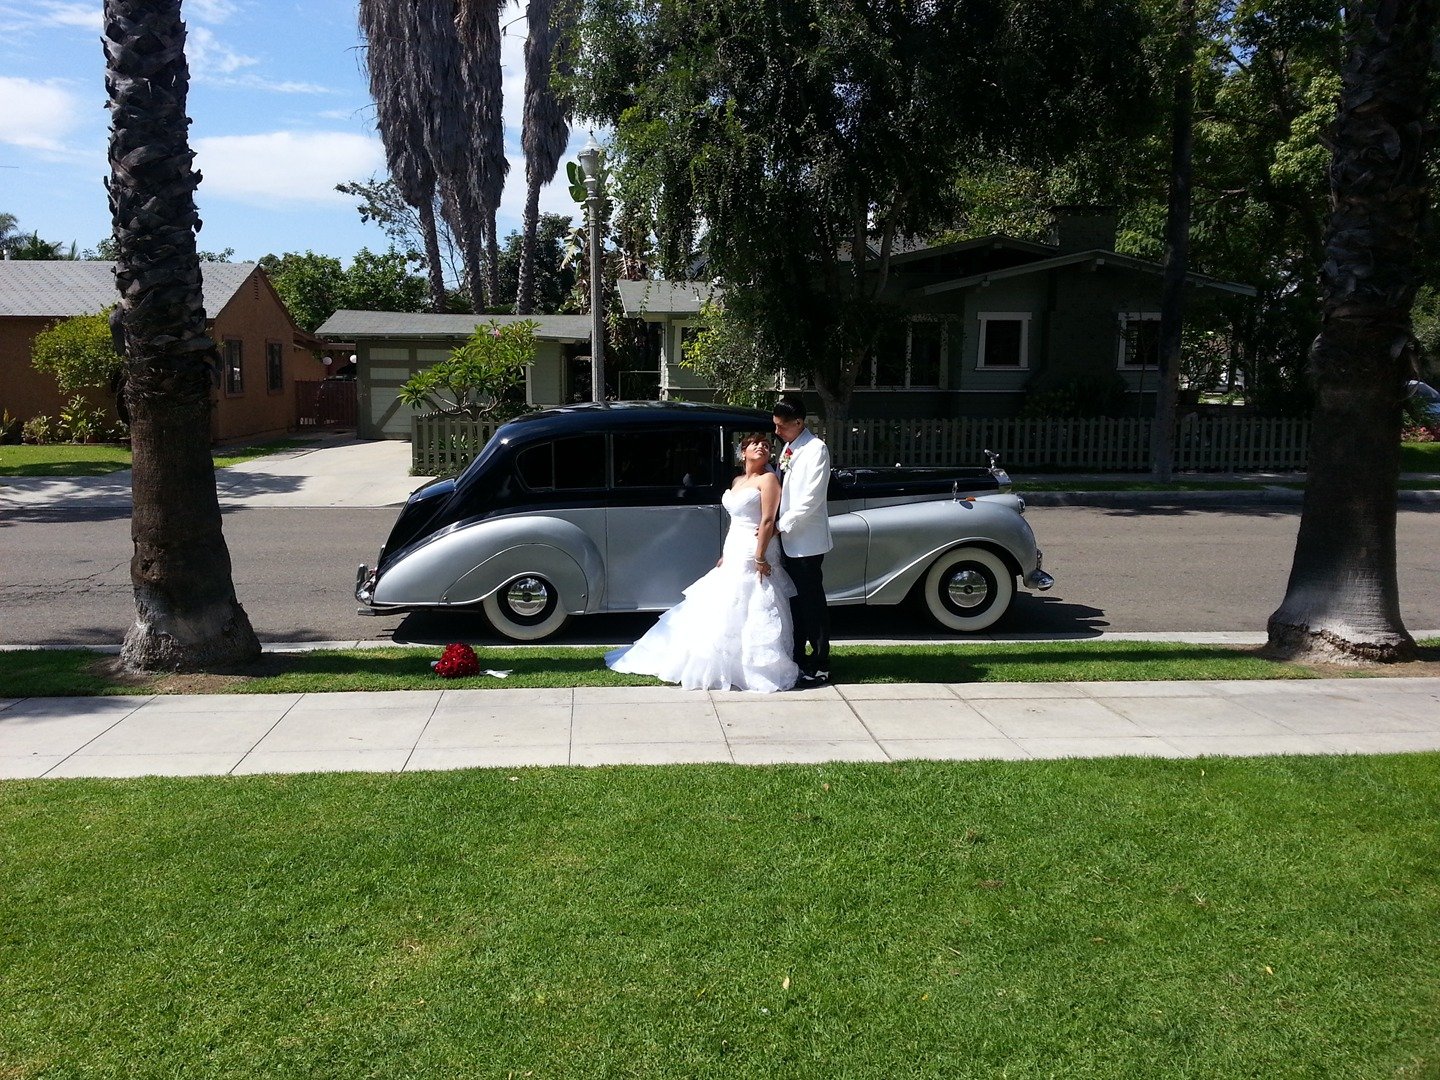 Classic car rental – The perfect way to bring royal flavor to your wedding